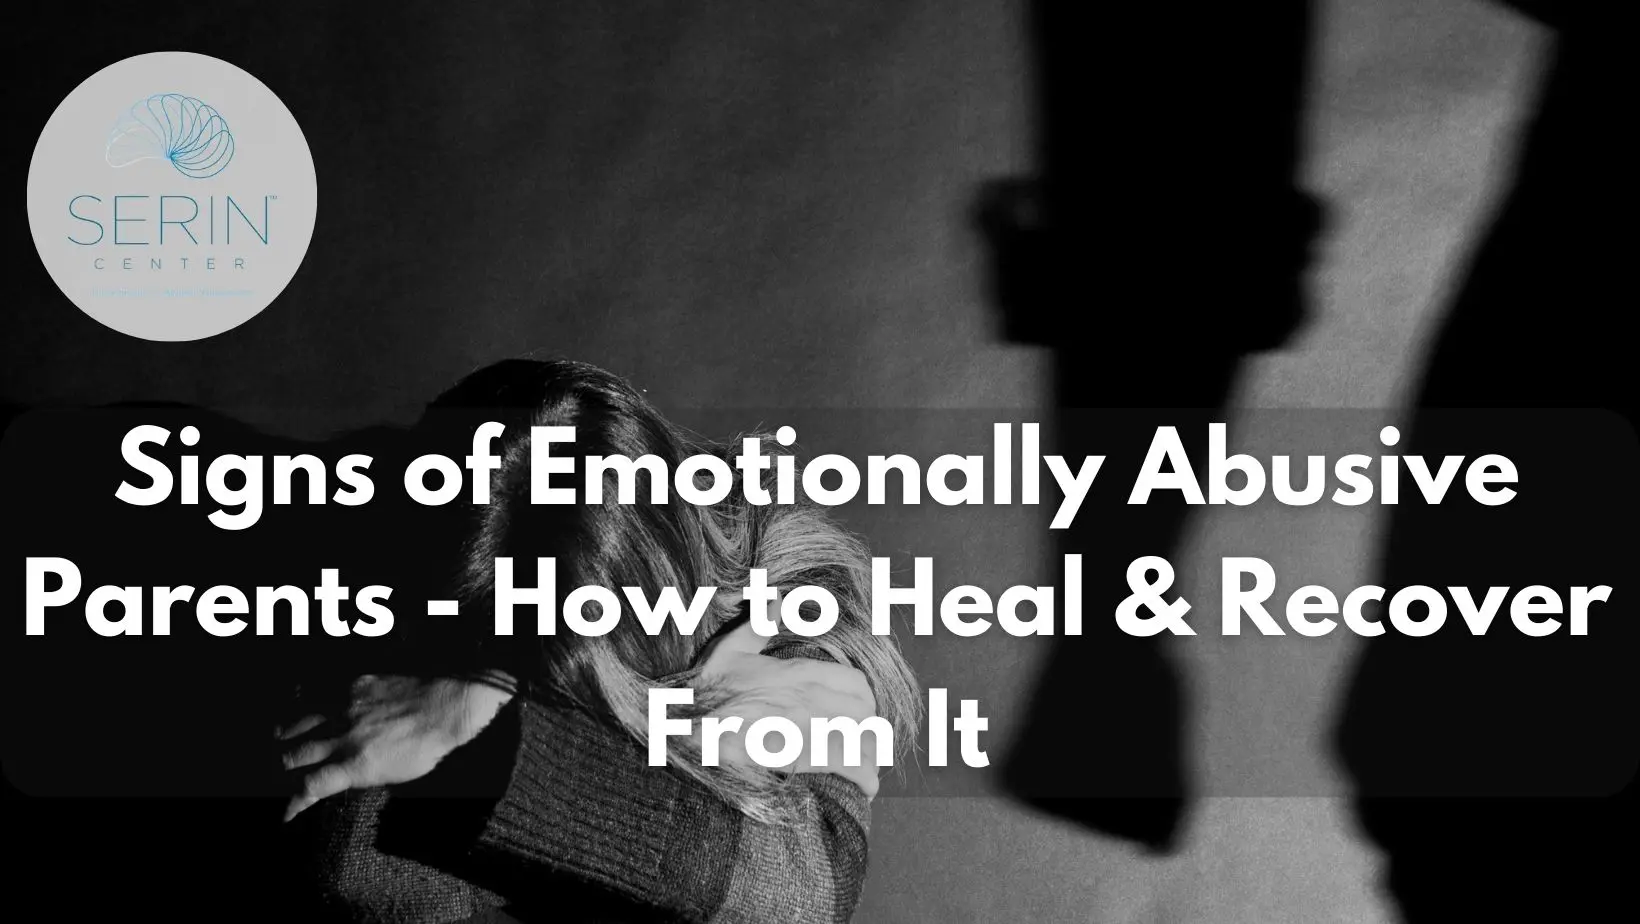 Explore the characteristics of emotionally abusive parents and learn effective strategies to heal and recover from their impact.